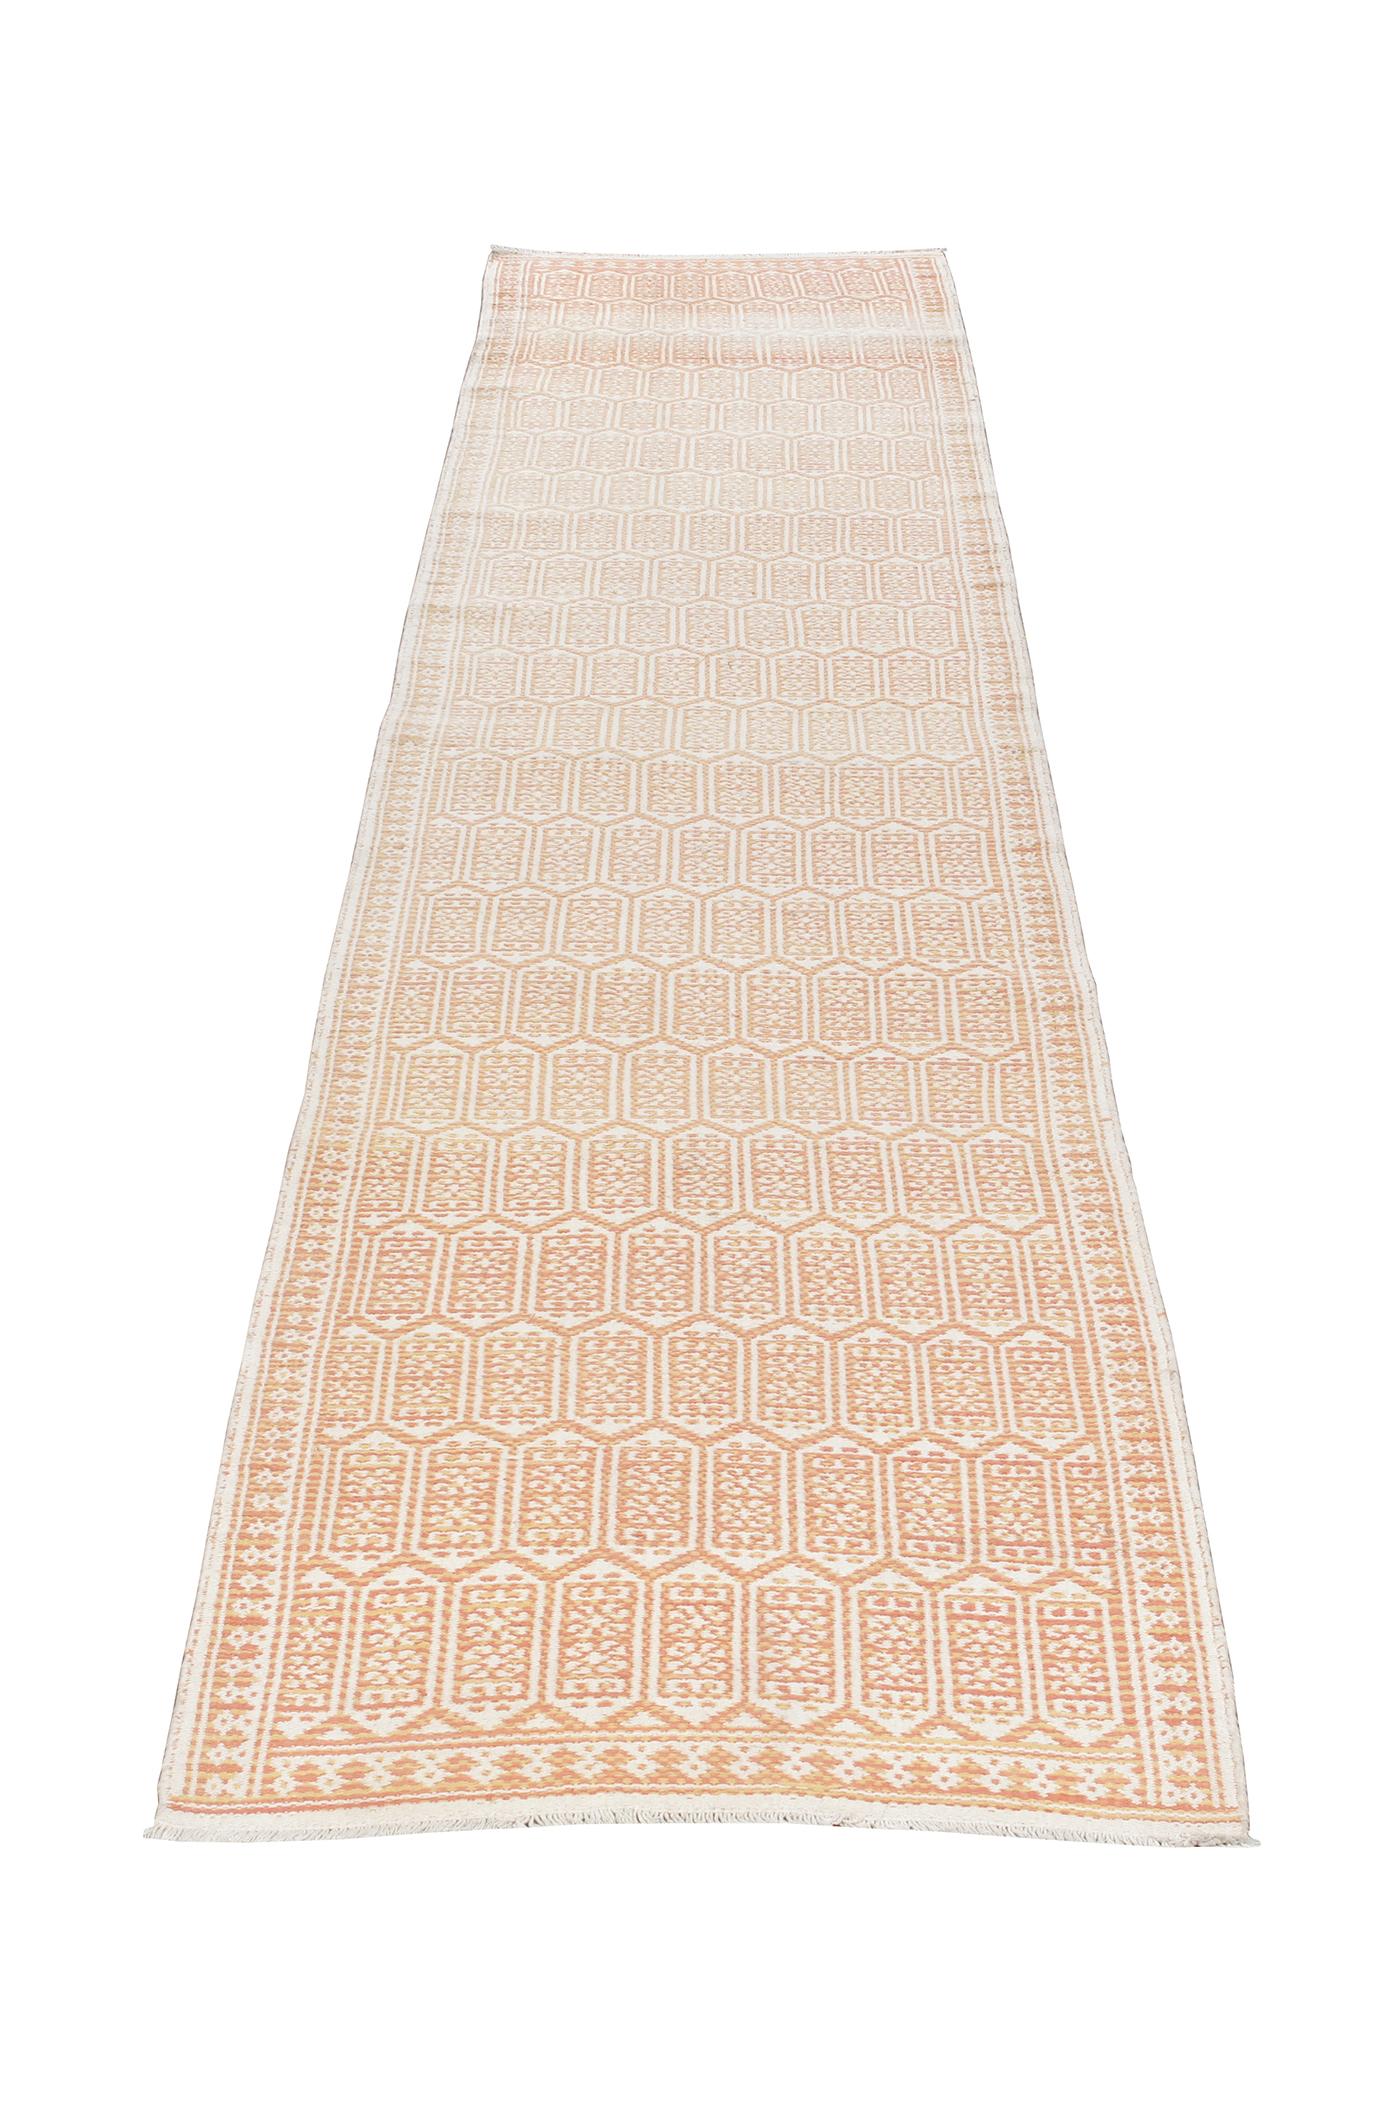 Hand-Woven Decorative Tribal Persian Flat-Weave Runner For Sale